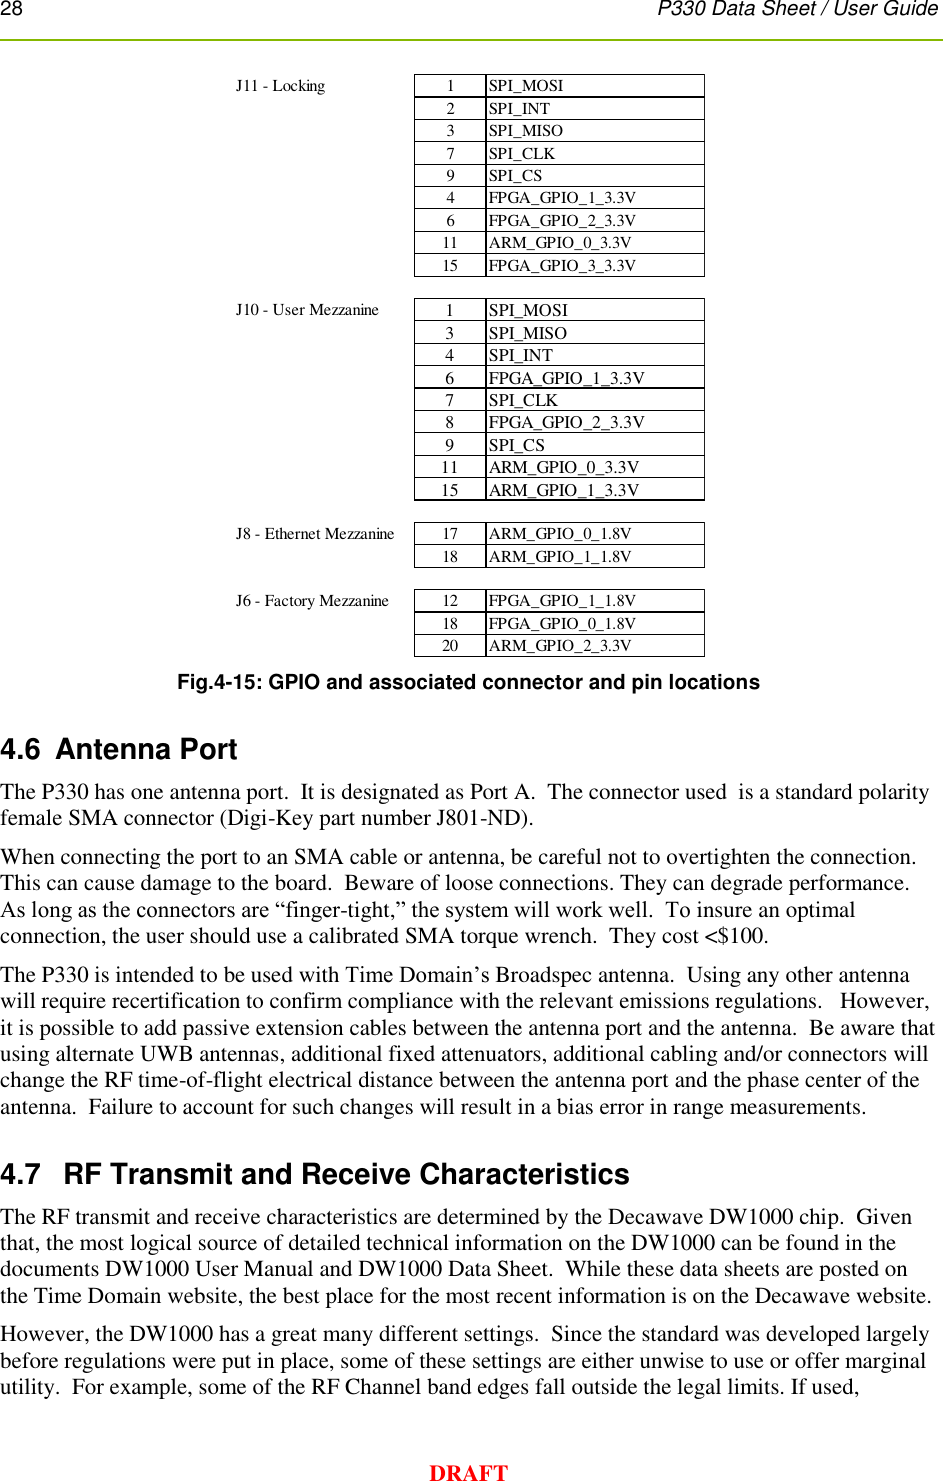 28      P330 Data Sheet / User Guide  DRAFT  Fig.4-15: GPIO and associated connector and pin locations 4.6  Antenna Port The P330 has one antenna port.  It is designated as Port A.  The connector used  is a standard polarity female SMA connector (Digi-Key part number J801-ND).  When connecting the port to an SMA cable or antenna, be careful not to overtighten the connection.  This can cause damage to the board.  Beware of loose connections. They can degrade performance.  As long as the connectors are “finger-tight,” the system will work well.  To insure an optimal connection, the user should use a calibrated SMA torque wrench.  They cost &lt;$100. The P330 is intended to be used with Time Domain’s Broadspec antenna.  Using any other antenna will require recertification to confirm compliance with the relevant emissions regulations.   However, it is possible to add passive extension cables between the antenna port and the antenna.  Be aware that using alternate UWB antennas, additional fixed attenuators, additional cabling and/or connectors will change the RF time-of-flight electrical distance between the antenna port and the phase center of the antenna.  Failure to account for such changes will result in a bias error in range measurements.     4.7   RF Transmit and Receive Characteristics The RF transmit and receive characteristics are determined by the Decawave DW1000 chip.  Given that, the most logical source of detailed technical information on the DW1000 can be found in the documents DW1000 User Manual and DW1000 Data Sheet.  While these data sheets are posted on the Time Domain website, the best place for the most recent information is on the Decawave website. However, the DW1000 has a great many different settings.  Since the standard was developed largely before regulations were put in place, some of these settings are either unwise to use or offer marginal utility.  For example, some of the RF Channel band edges fall outside the legal limits. If used, J11 - Locking1 SPI_MOSI2 SPI_INT3 SPI_MISO7 SPI_CLK9 SPI_CS4 FPGA_GPIO_1_3.3V6 FPGA_GPIO_2_3.3V11 ARM_GPIO_0_3.3V15 FPGA_GPIO_3_3.3VJ10 - User Mezzanine1 SPI_MOSI3 SPI_MISO4 SPI_INT6 FPGA_GPIO_1_3.3V7 SPI_CLK8 FPGA_GPIO_2_3.3V9 SPI_CS11 ARM_GPIO_0_3.3V15 ARM_GPIO_1_3.3VJ8 - Ethernet Mezzanine17 ARM_GPIO_0_1.8V18 ARM_GPIO_1_1.8VJ6 - Factory Mezzanine12 FPGA_GPIO_1_1.8V18 FPGA_GPIO_0_1.8V20 ARM_GPIO_2_3.3V